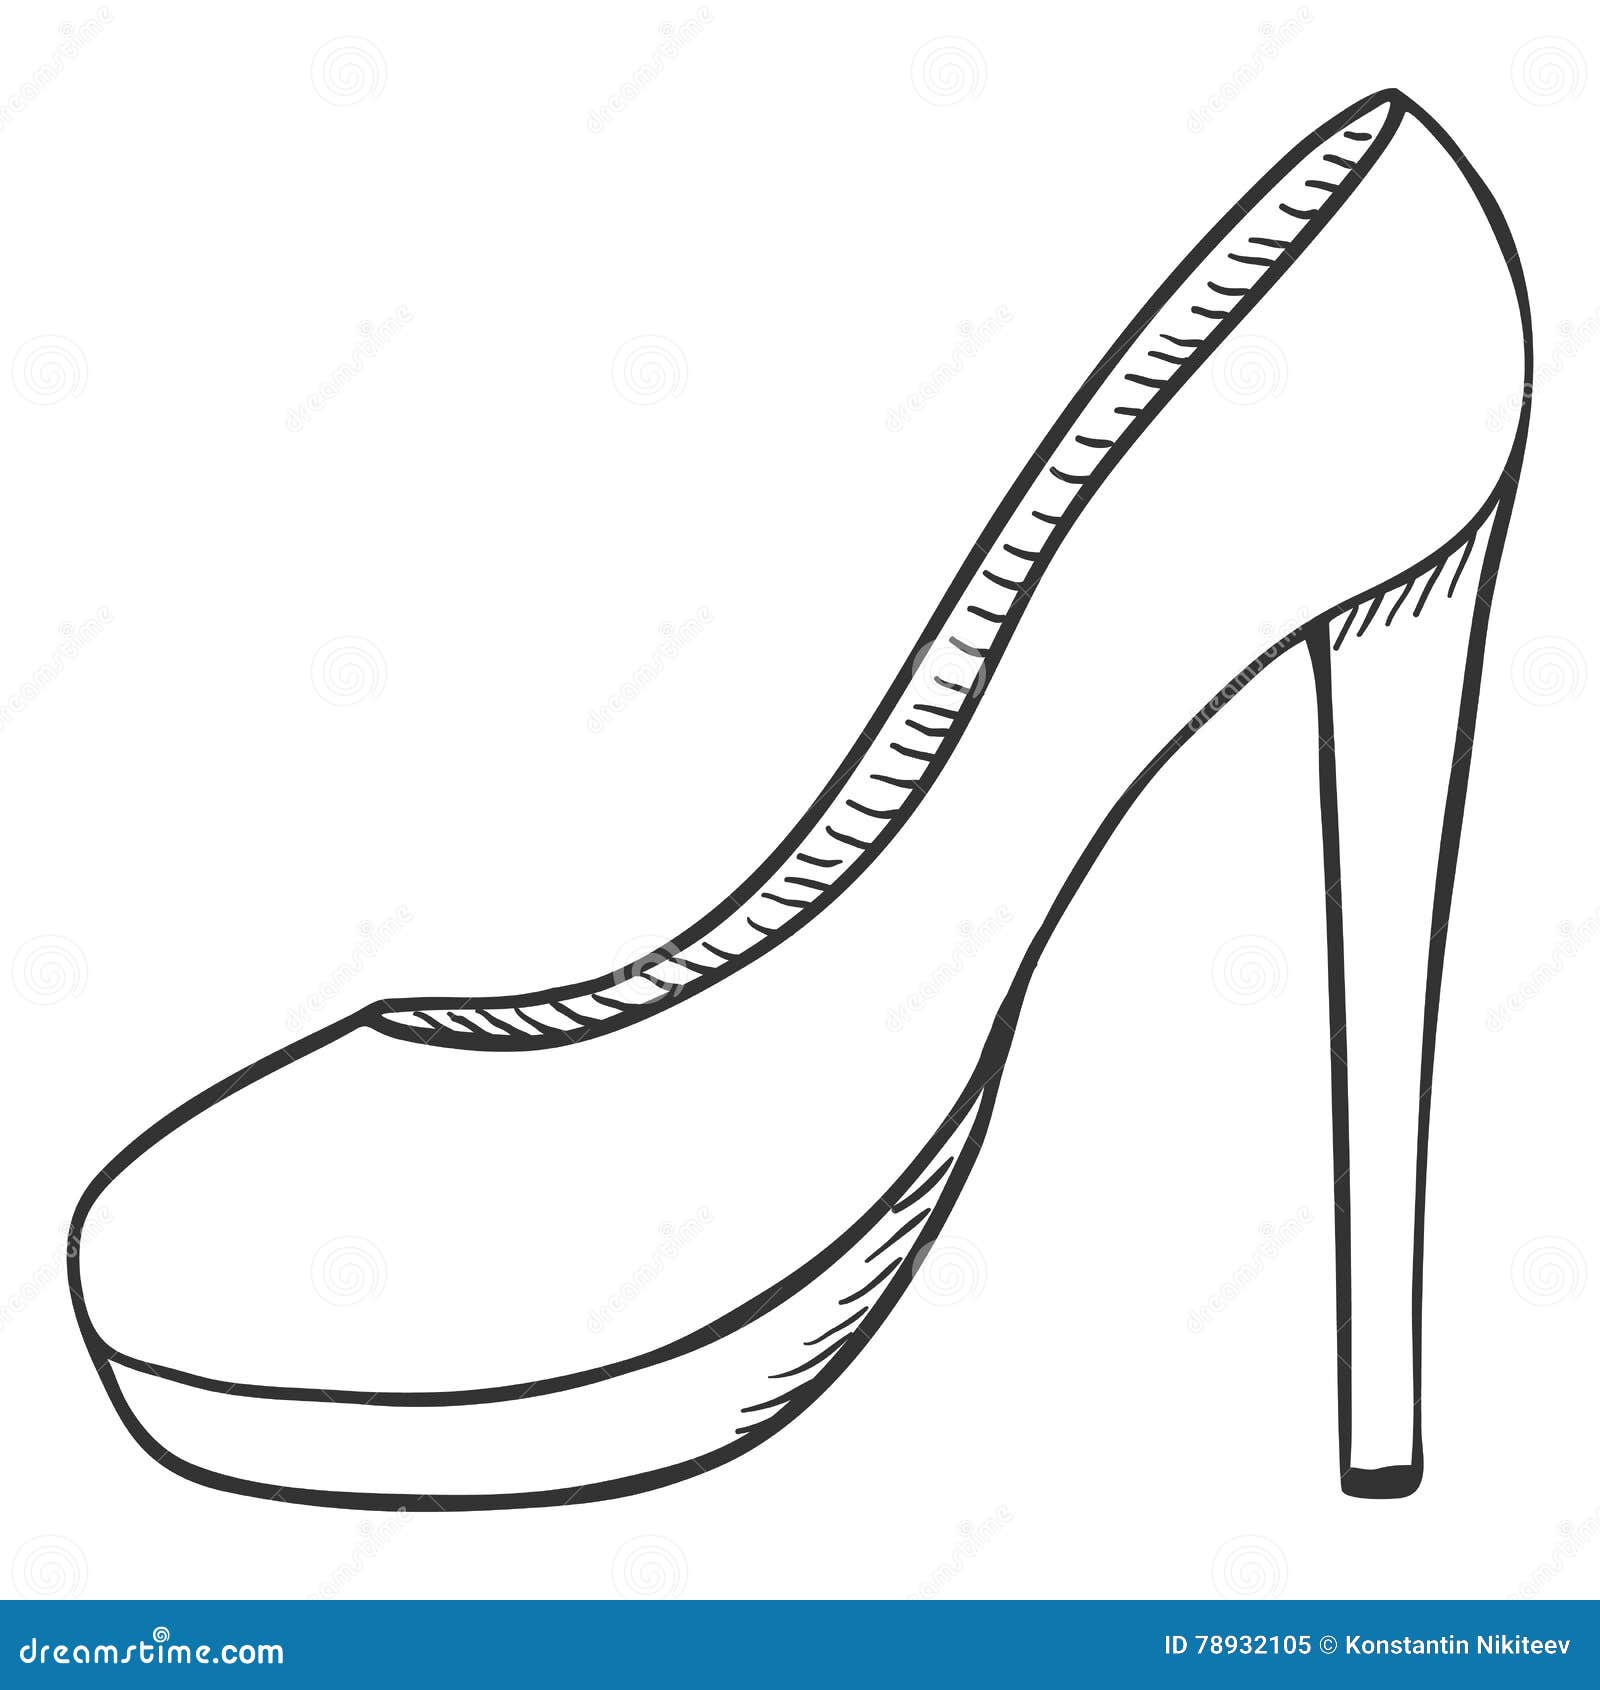 Image result for high heel shoe drawings  Shoes drawing Drawing high heels  High heel shoes